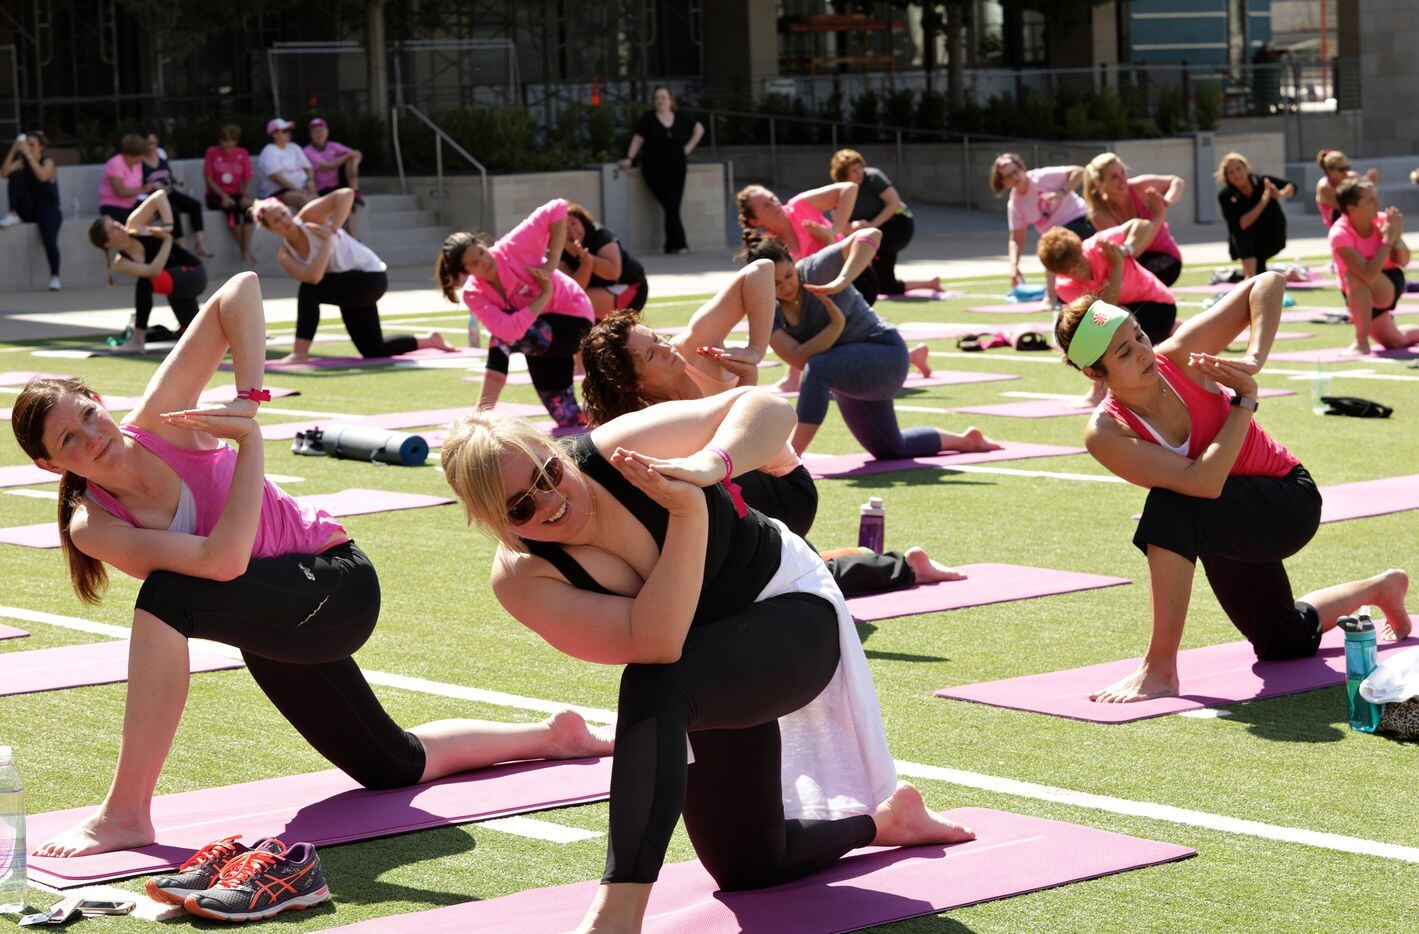 Susan G. Komen supporters participate in project:OM, a cancer research yoga event, held at...